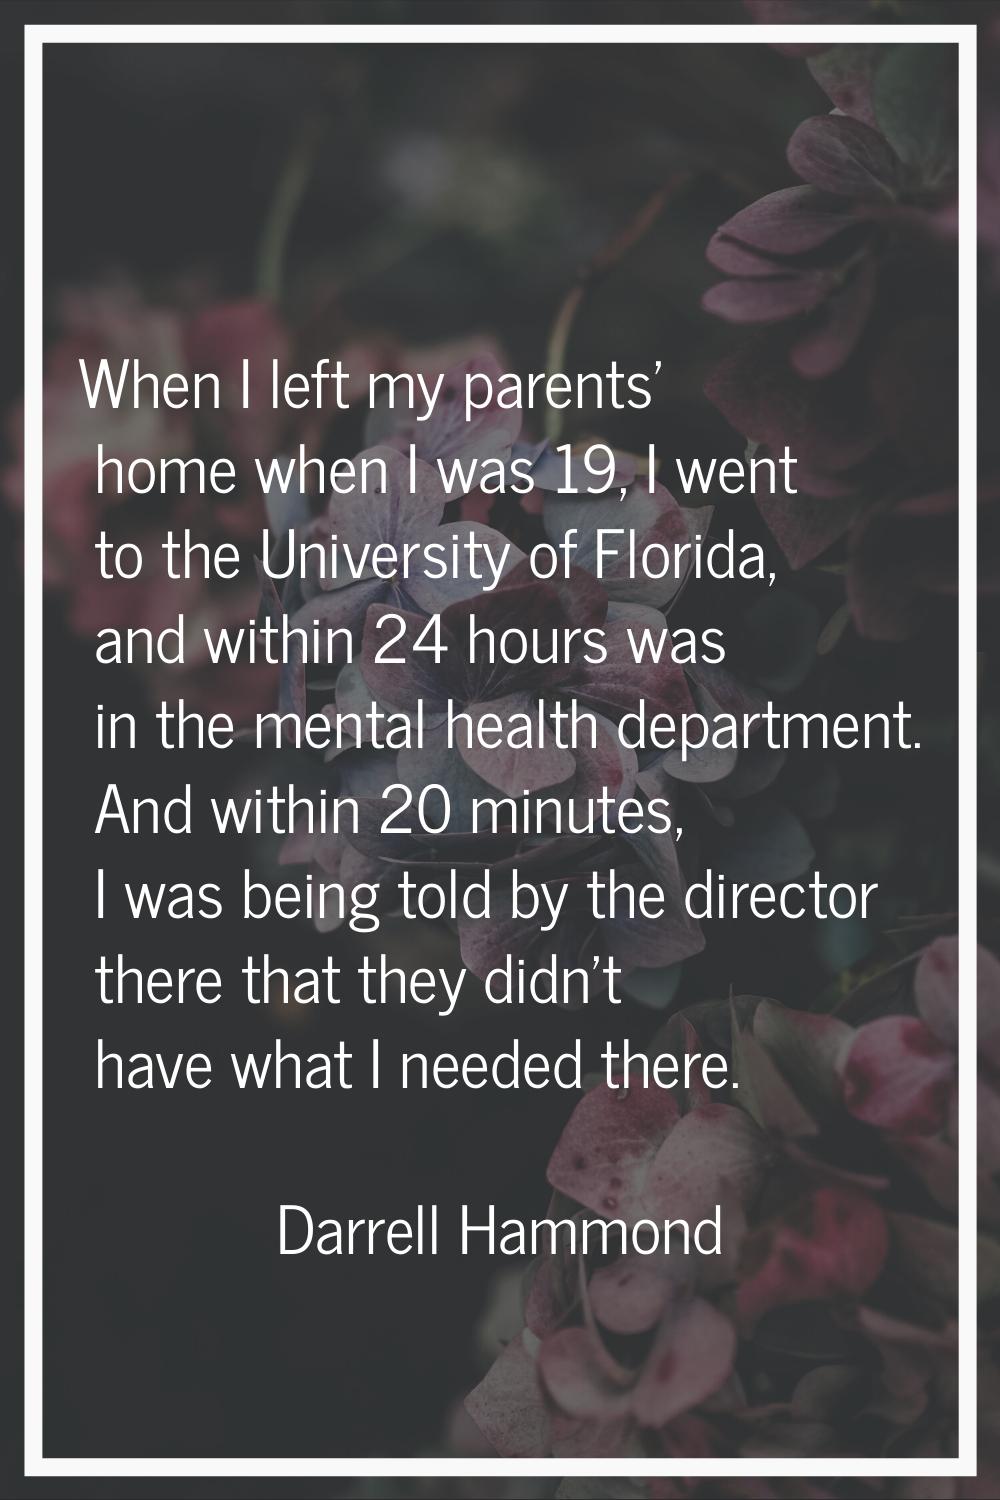 When I left my parents' home when I was 19, I went to the University of Florida, and within 24 hour